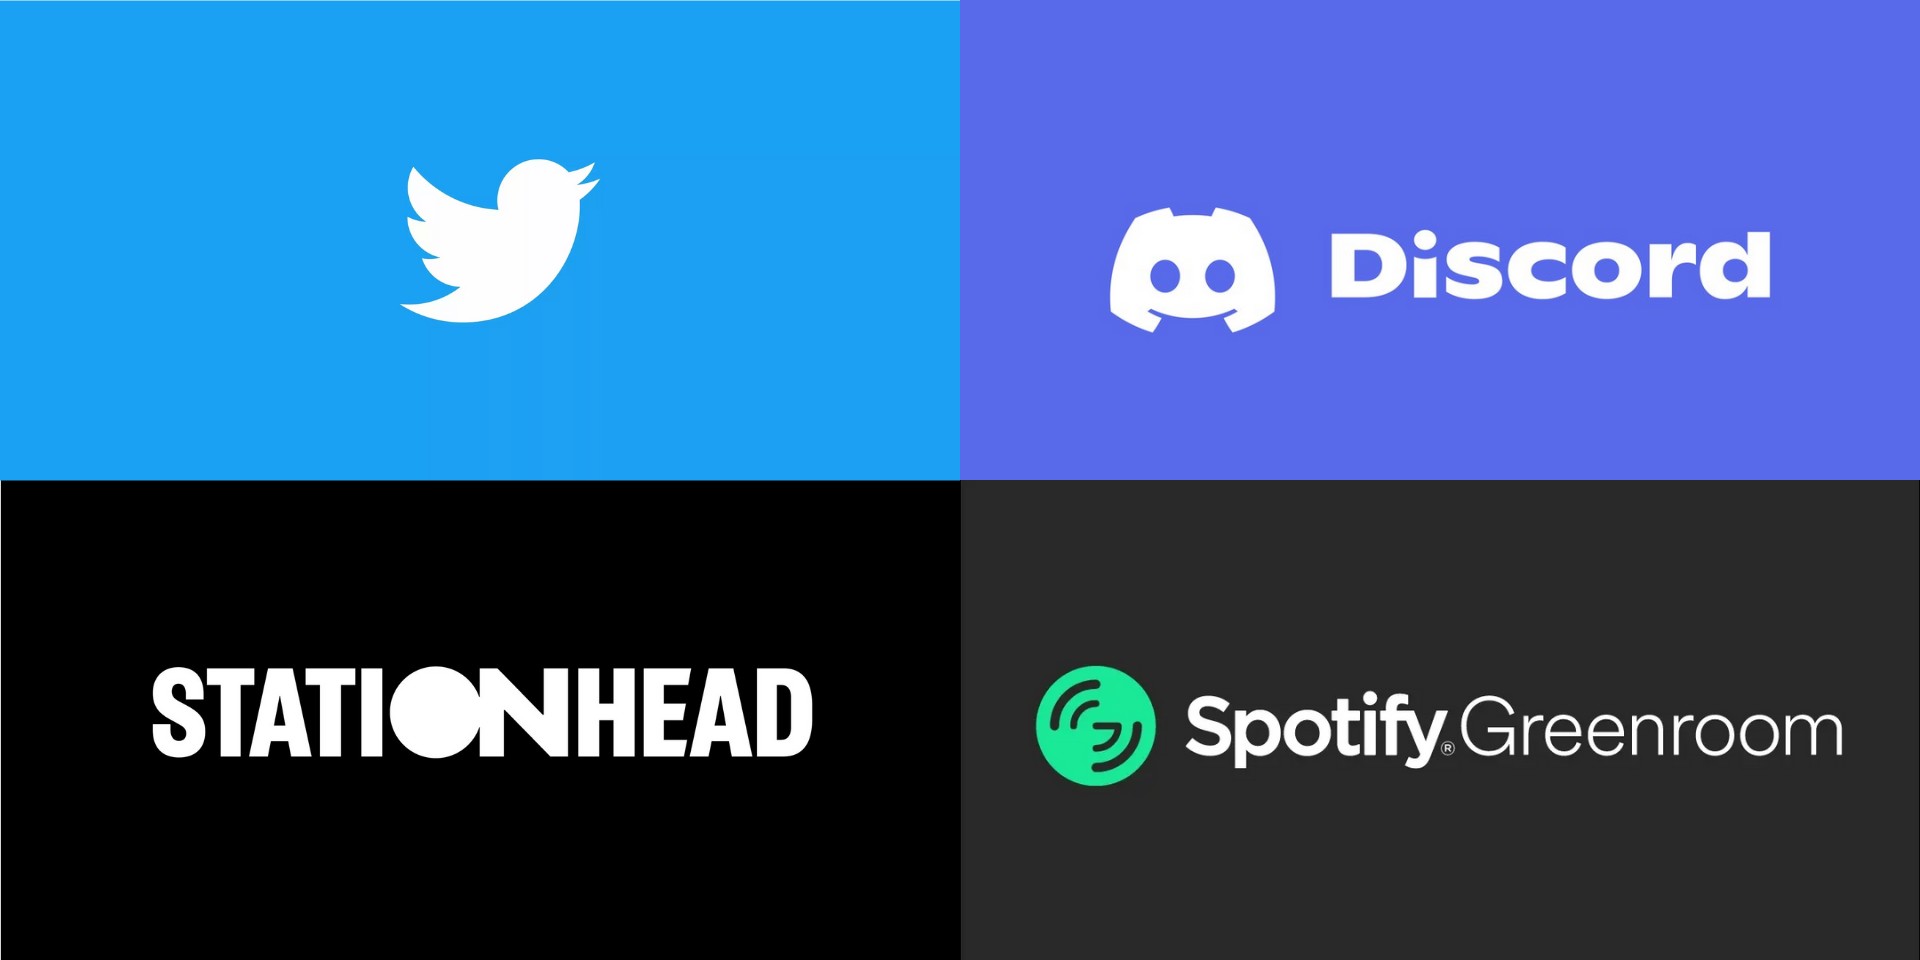 7 social audio room apps to check out - Stationhead, Spotify Greenroom, Discord Stages, Twitter Spaces, and more